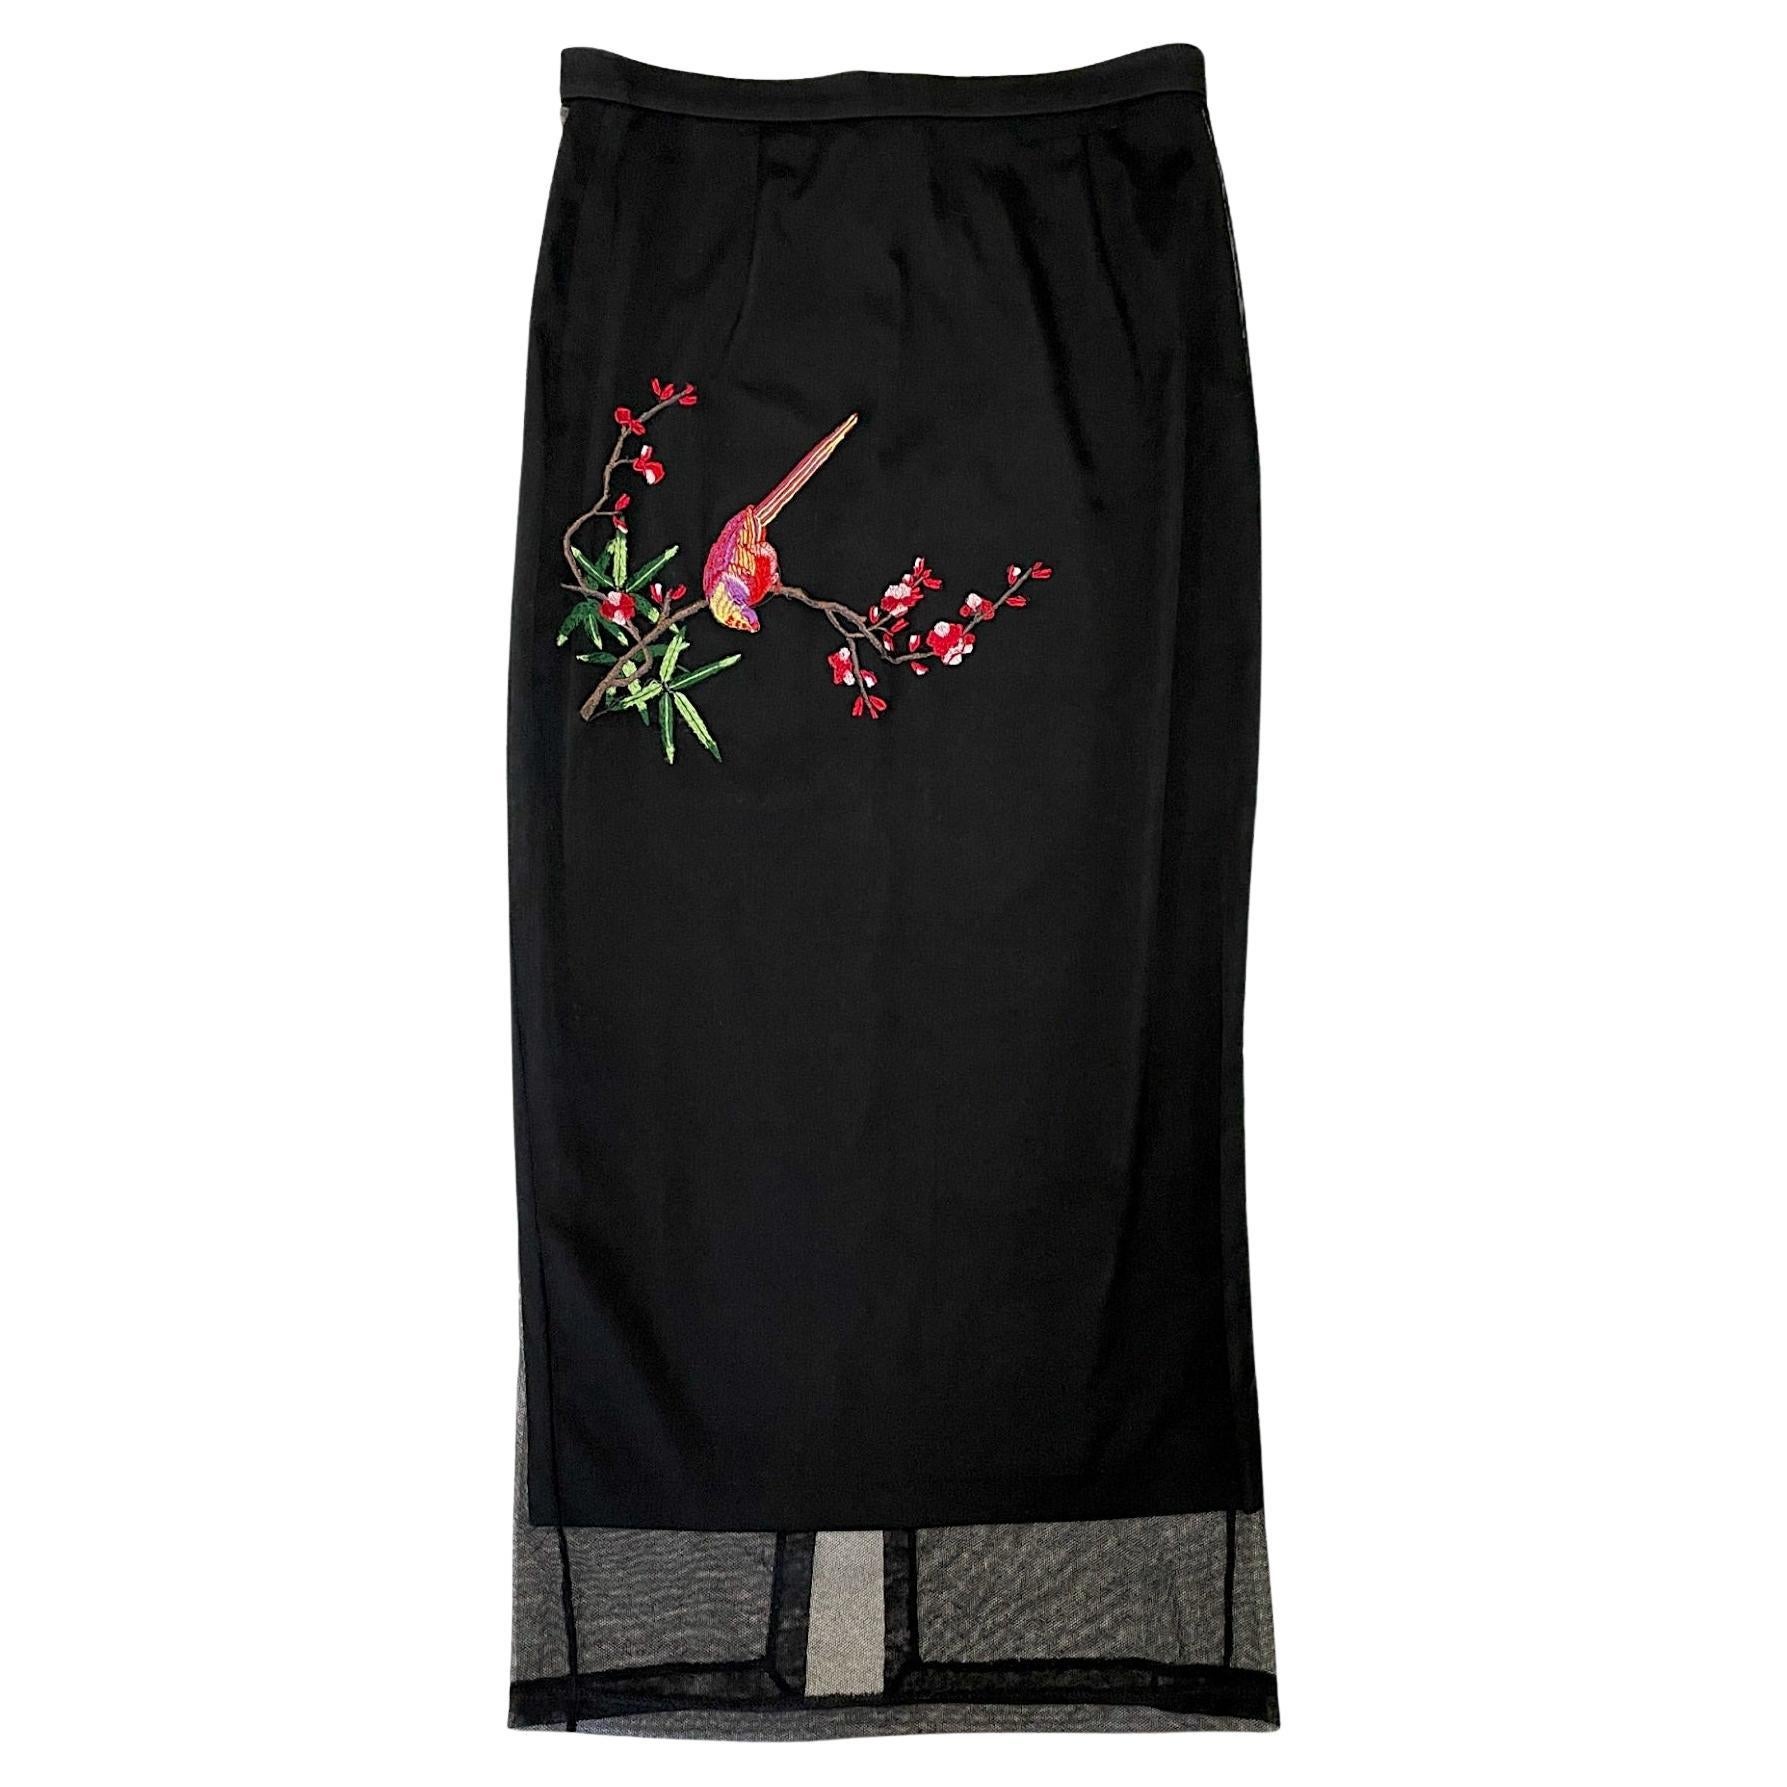 Dolce e Gabbana - D&G "Embroided Nature" Double Skirt S/S 1999 For Sale